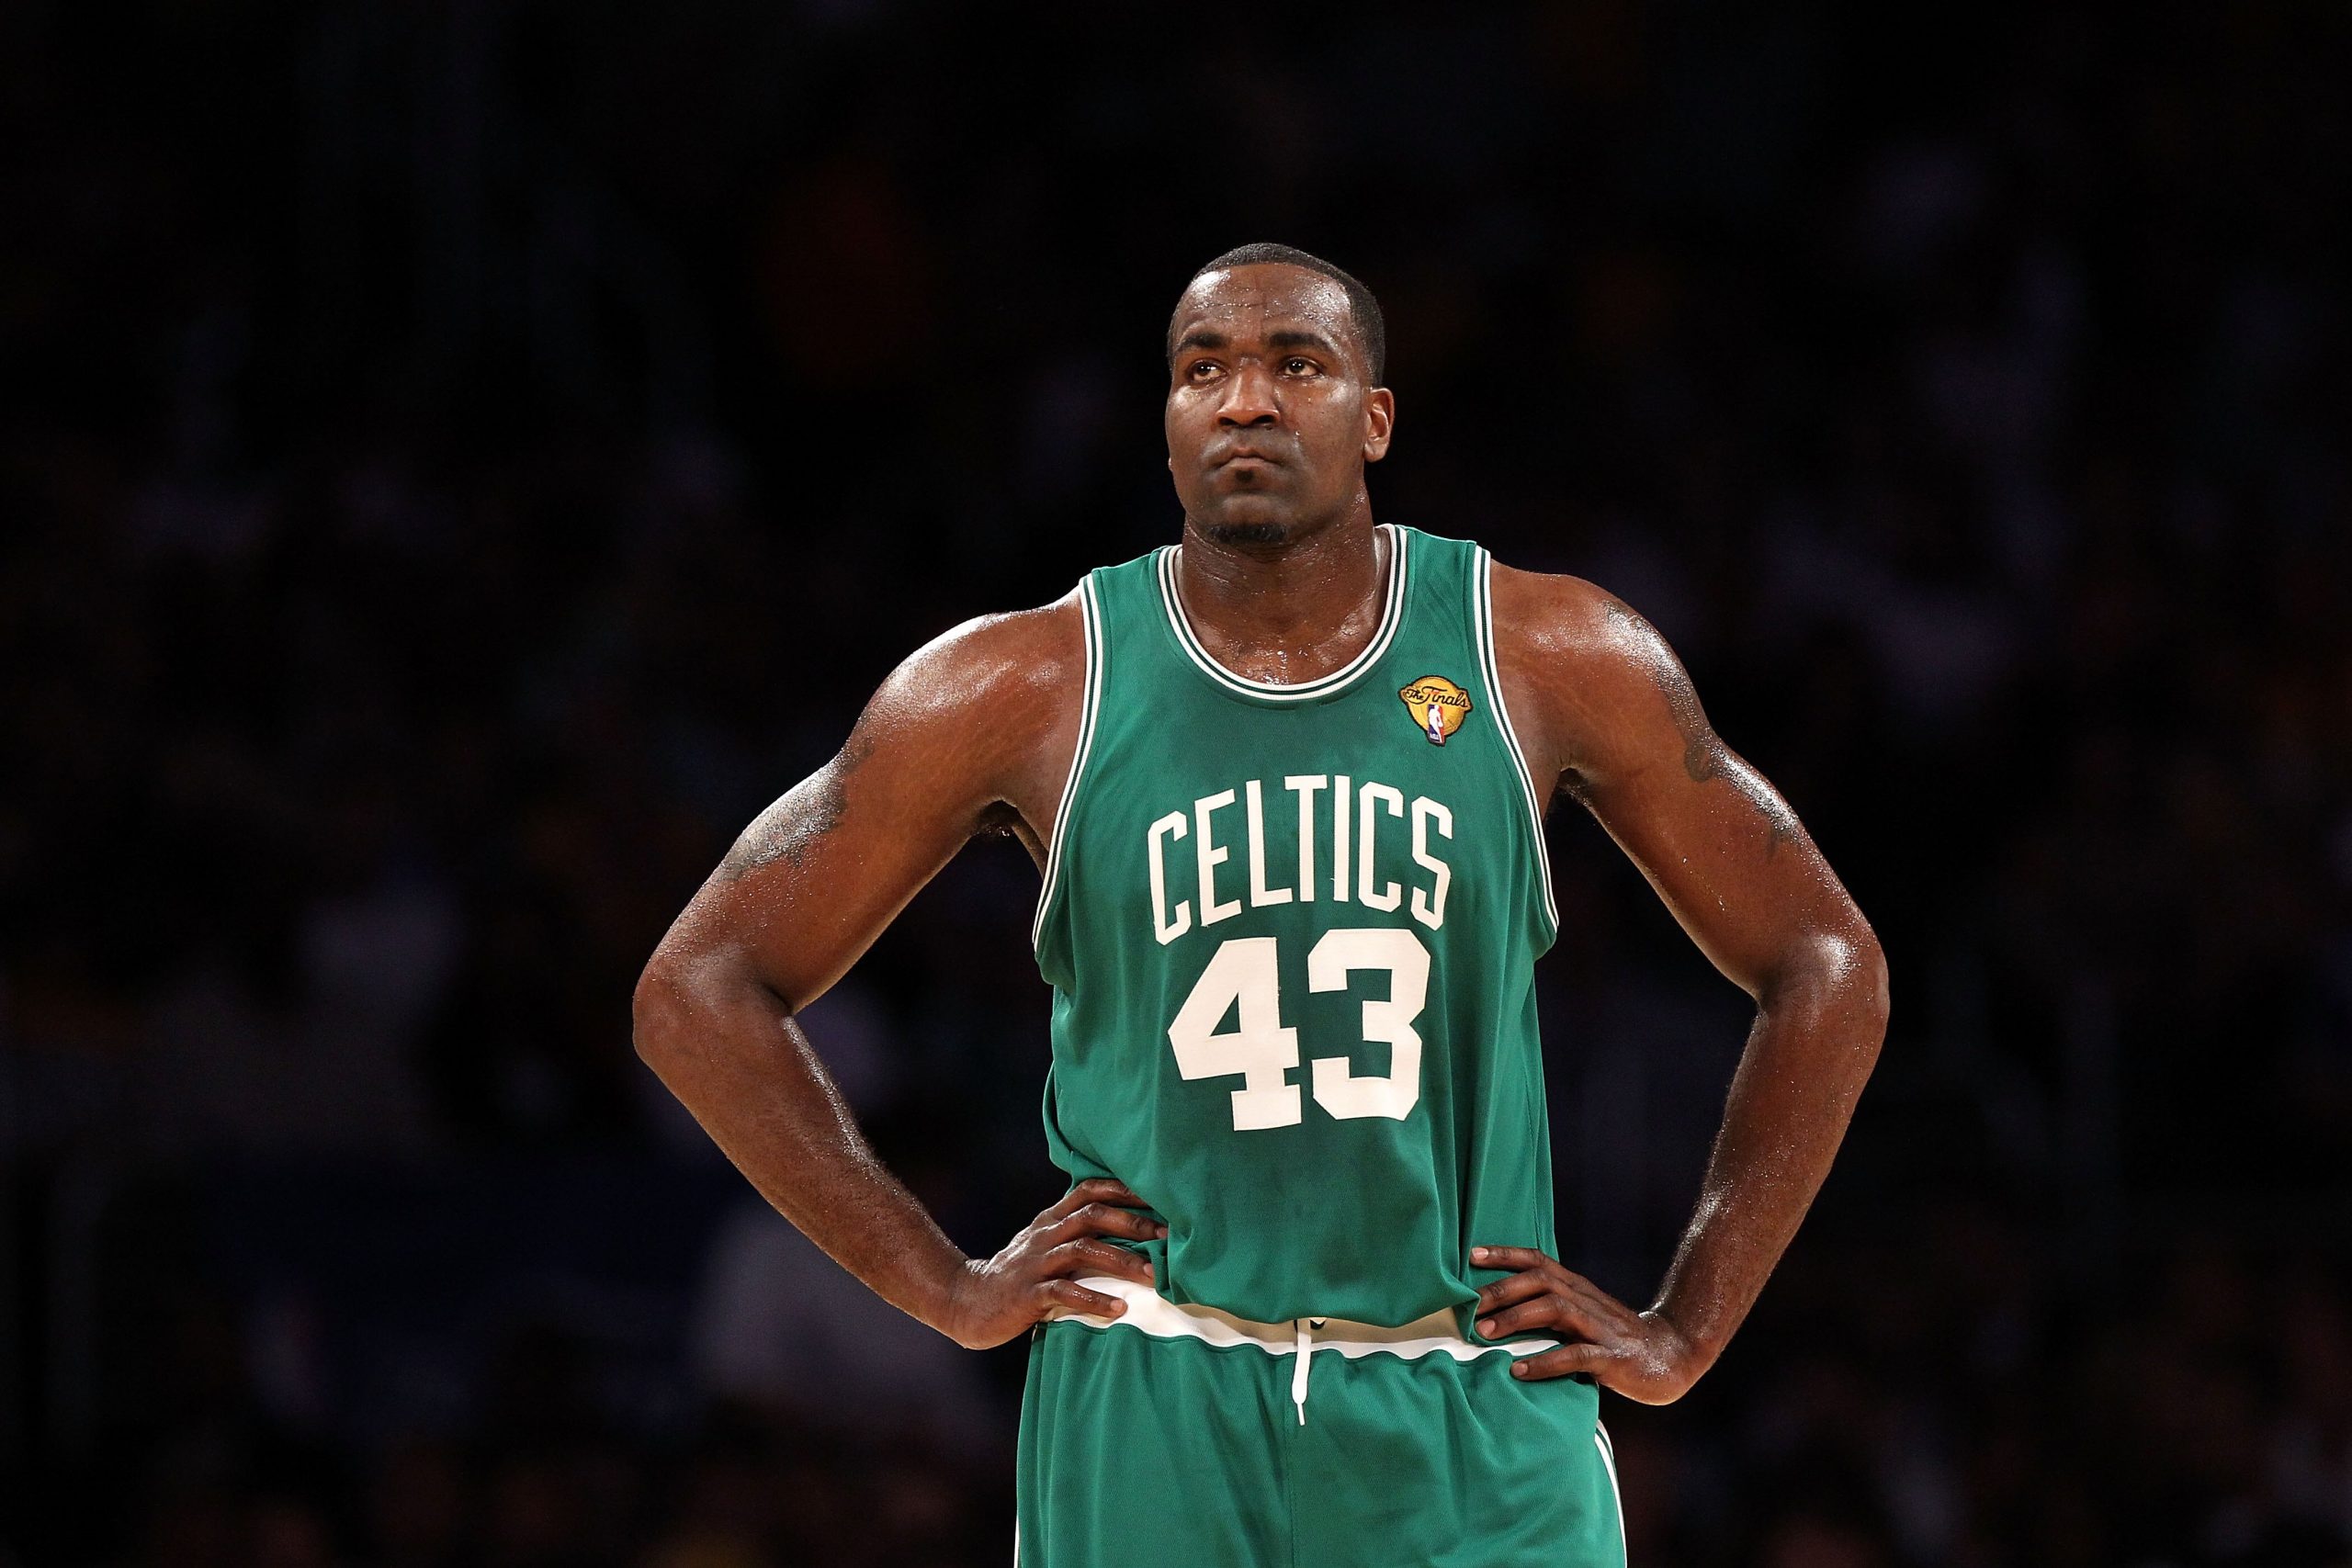 Kendrick Perkins of the Boston Celtics looks on against the Los Angeles Lakers in Game 2 of the 2010 NBA Finals.